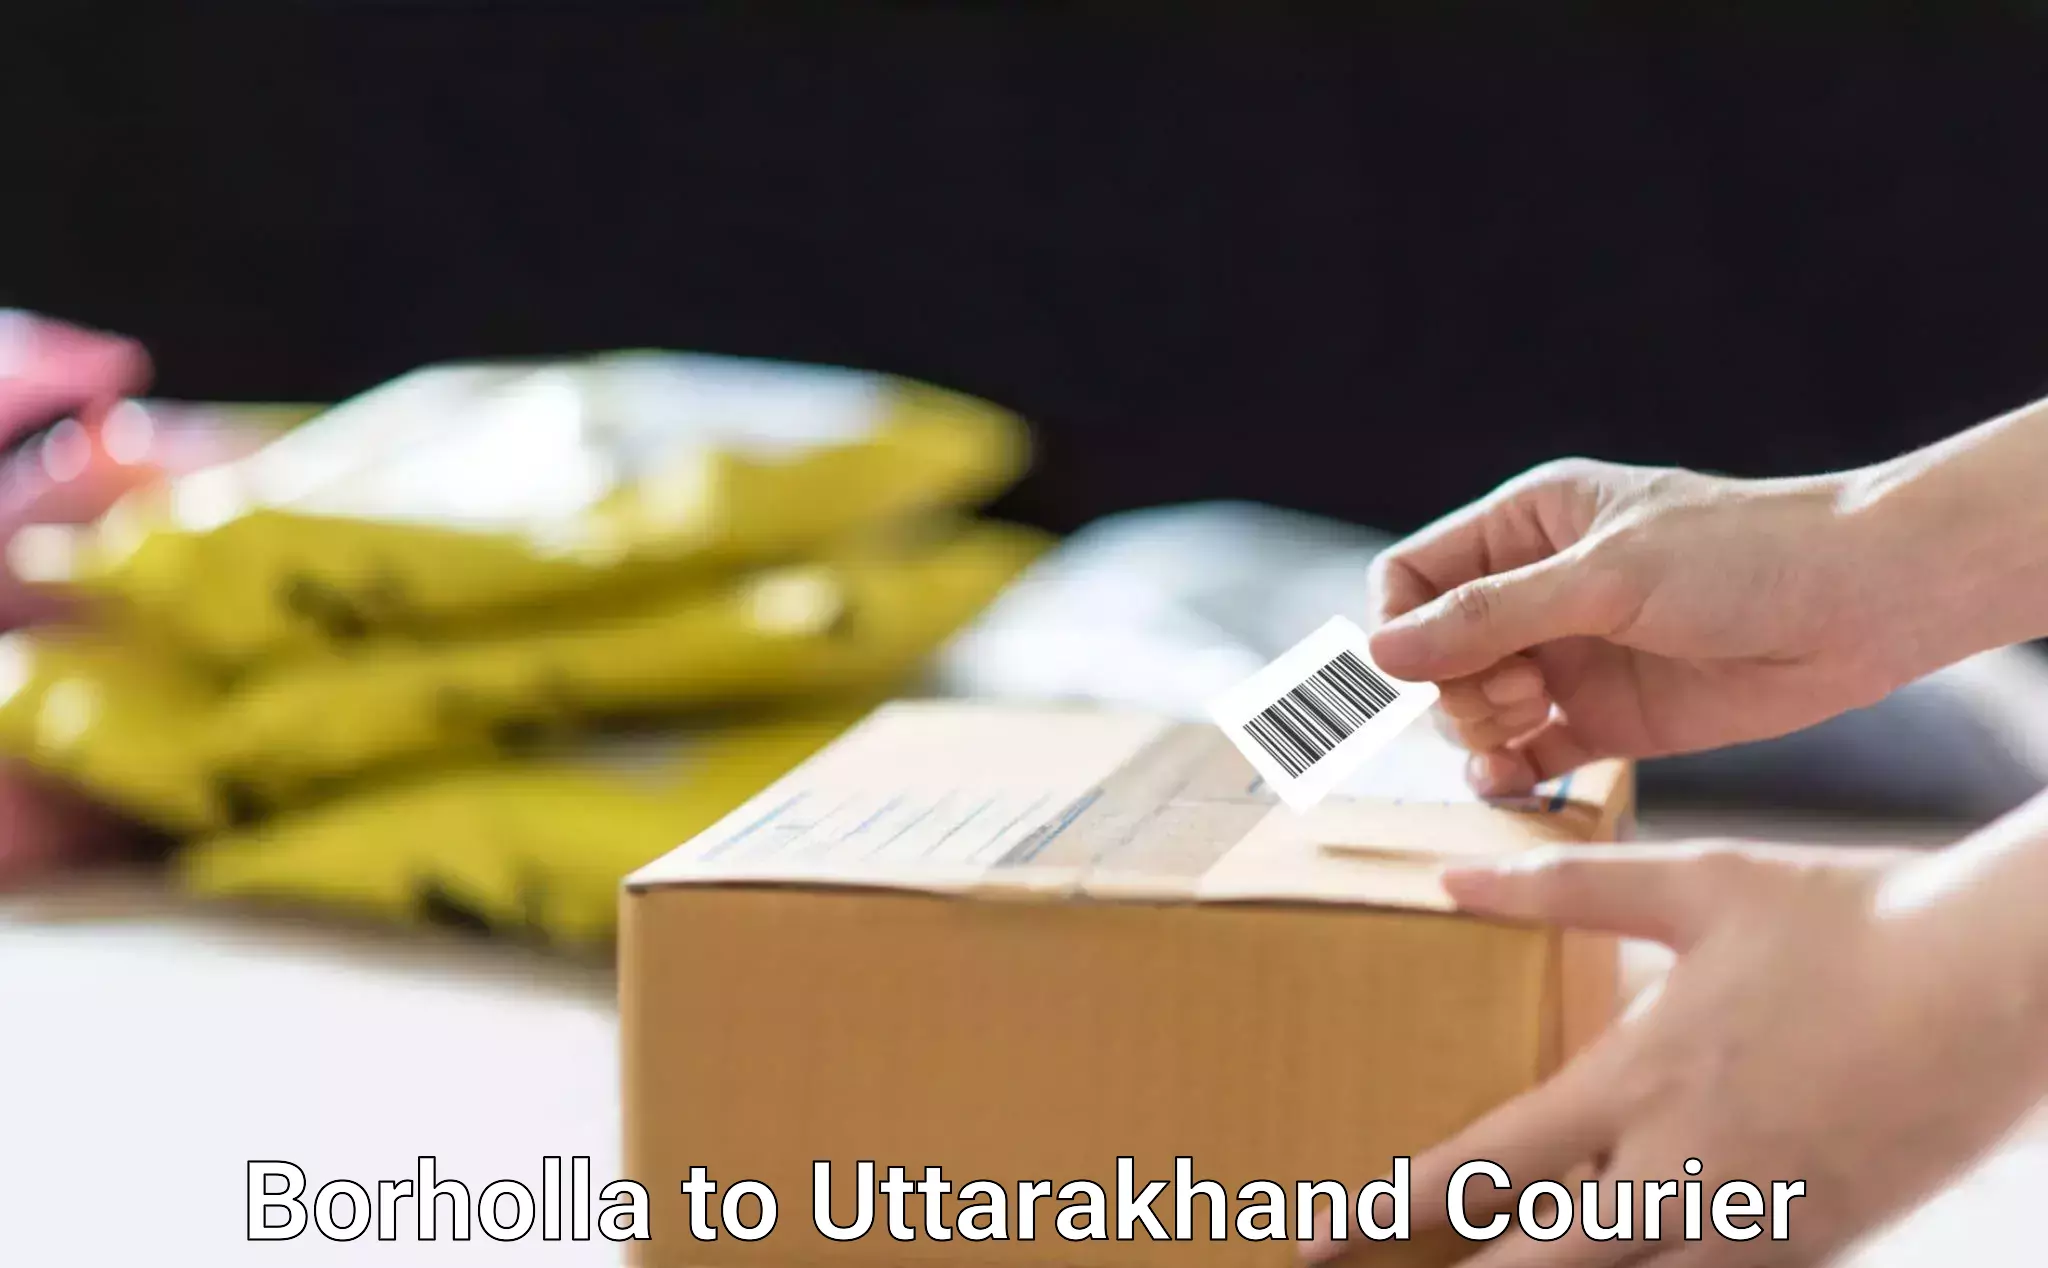 Fast-track shipping solutions Borholla to Uttarakhand